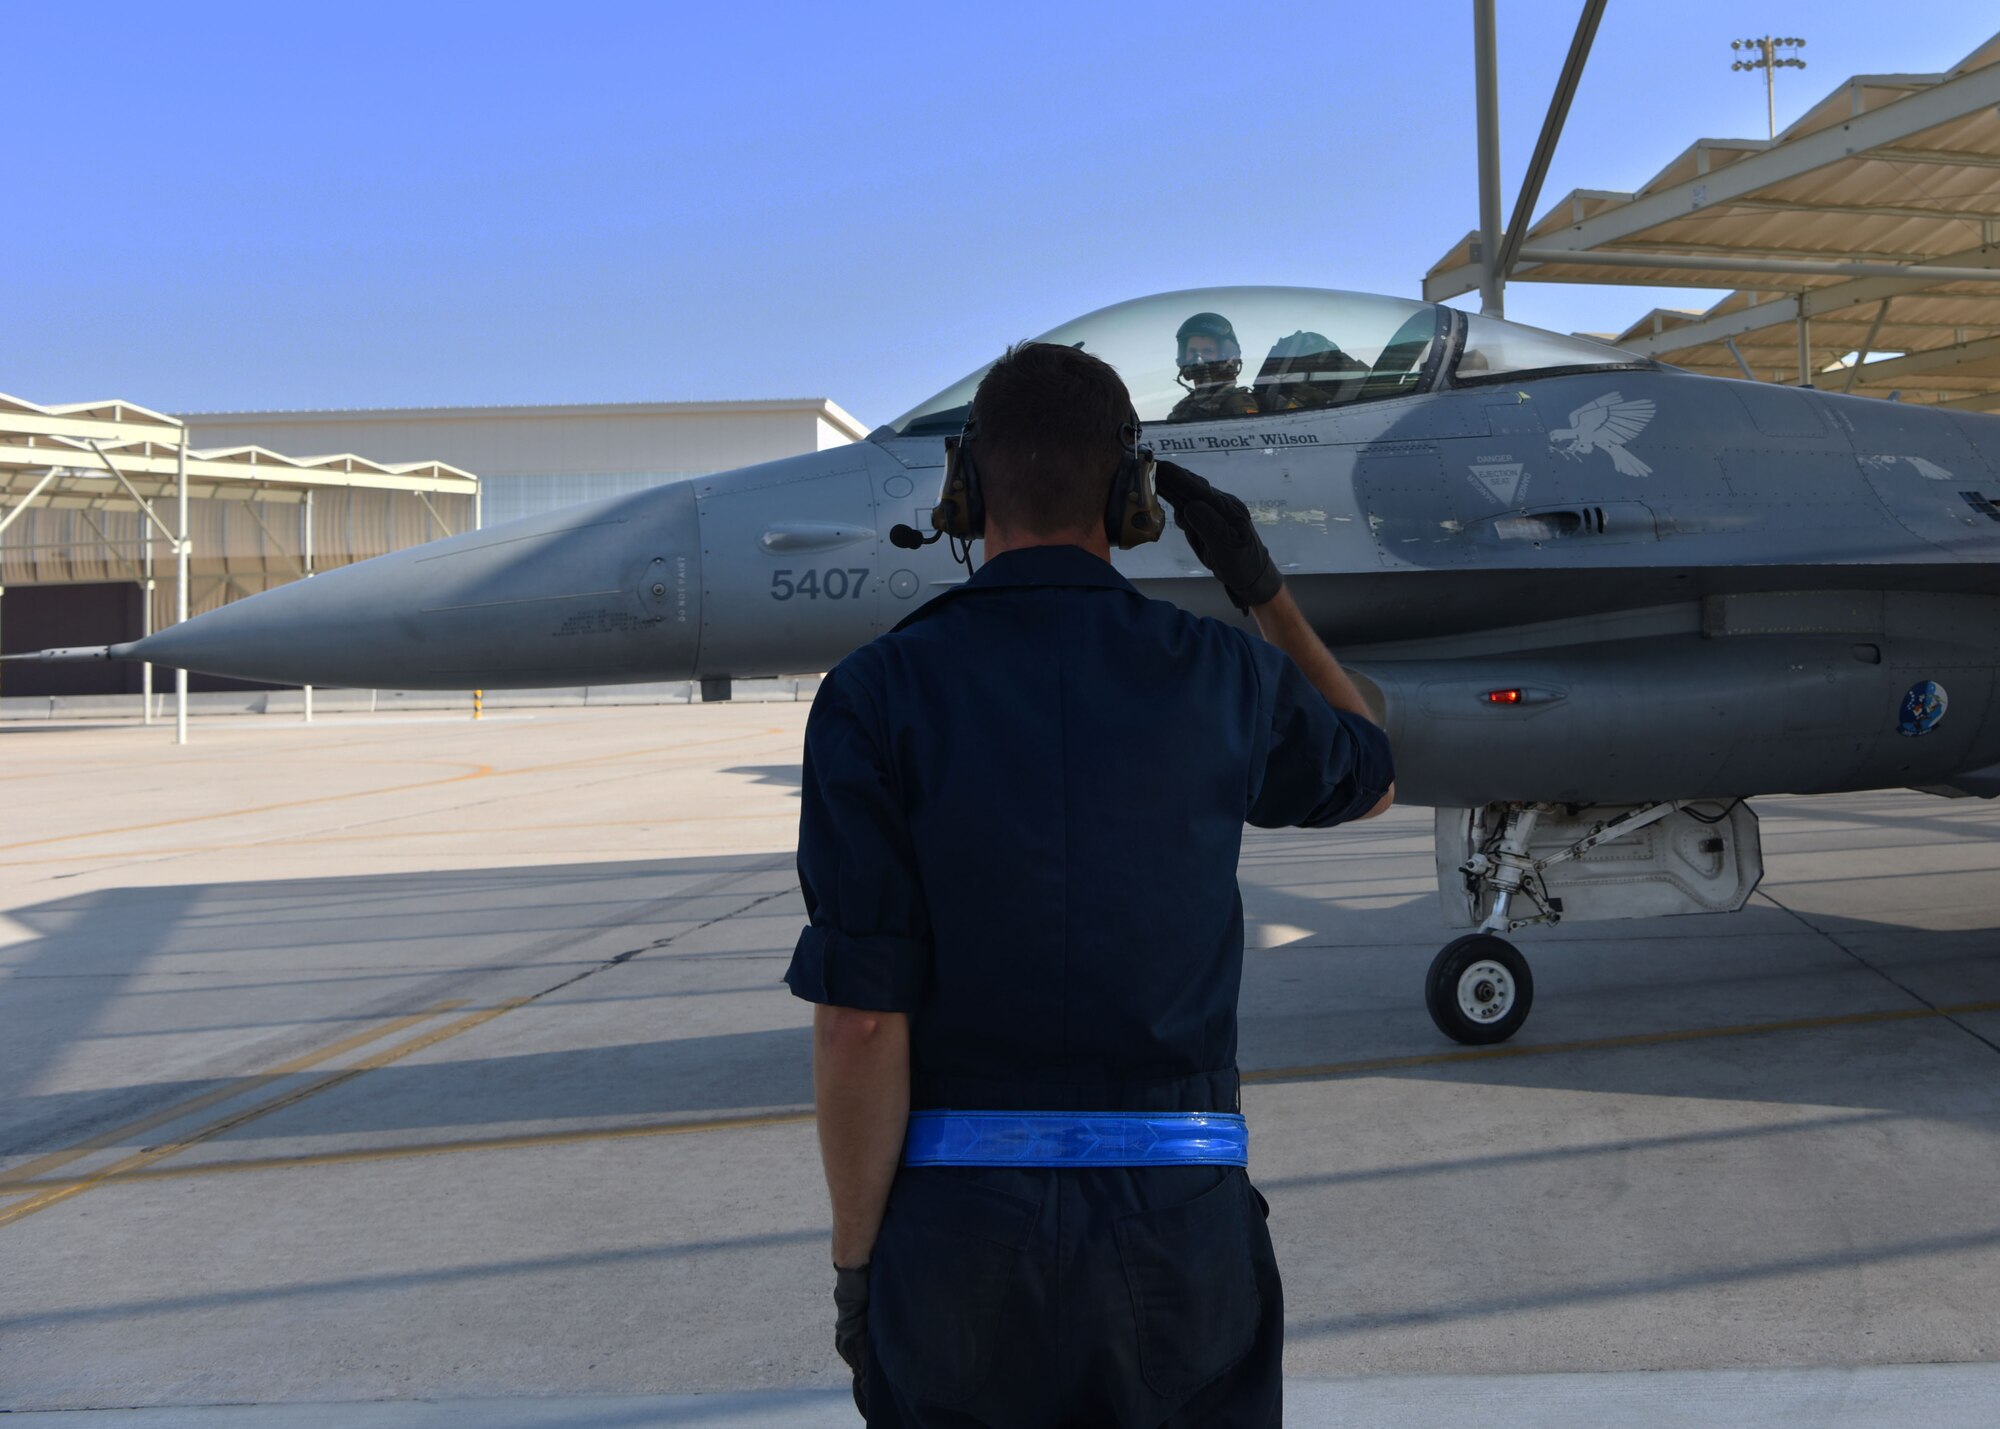 U.S. Air Force Airman Luke Prokop, 309th Aircraft Maintenance Unit crew chief, salutes Capt. Ryan Neely, 309th Fighter Squadron flight commander, as he taxis to the runway, August 14, 2018 at Luke Air Force Base, Ariz.